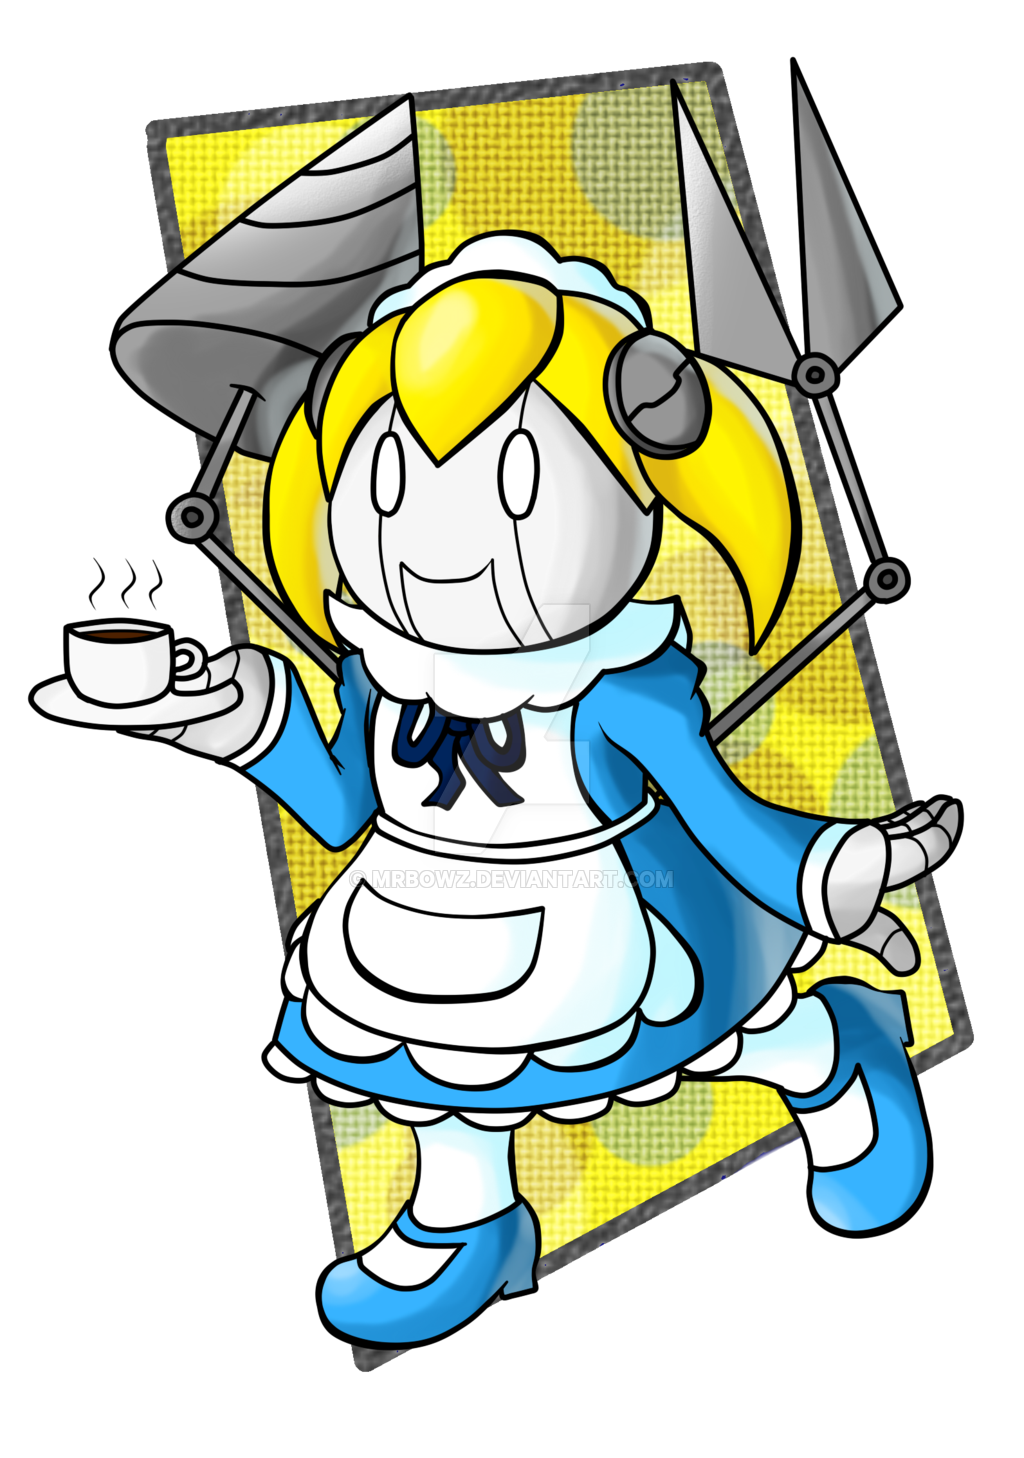 That iron maid by. Marshmallow clipart sad